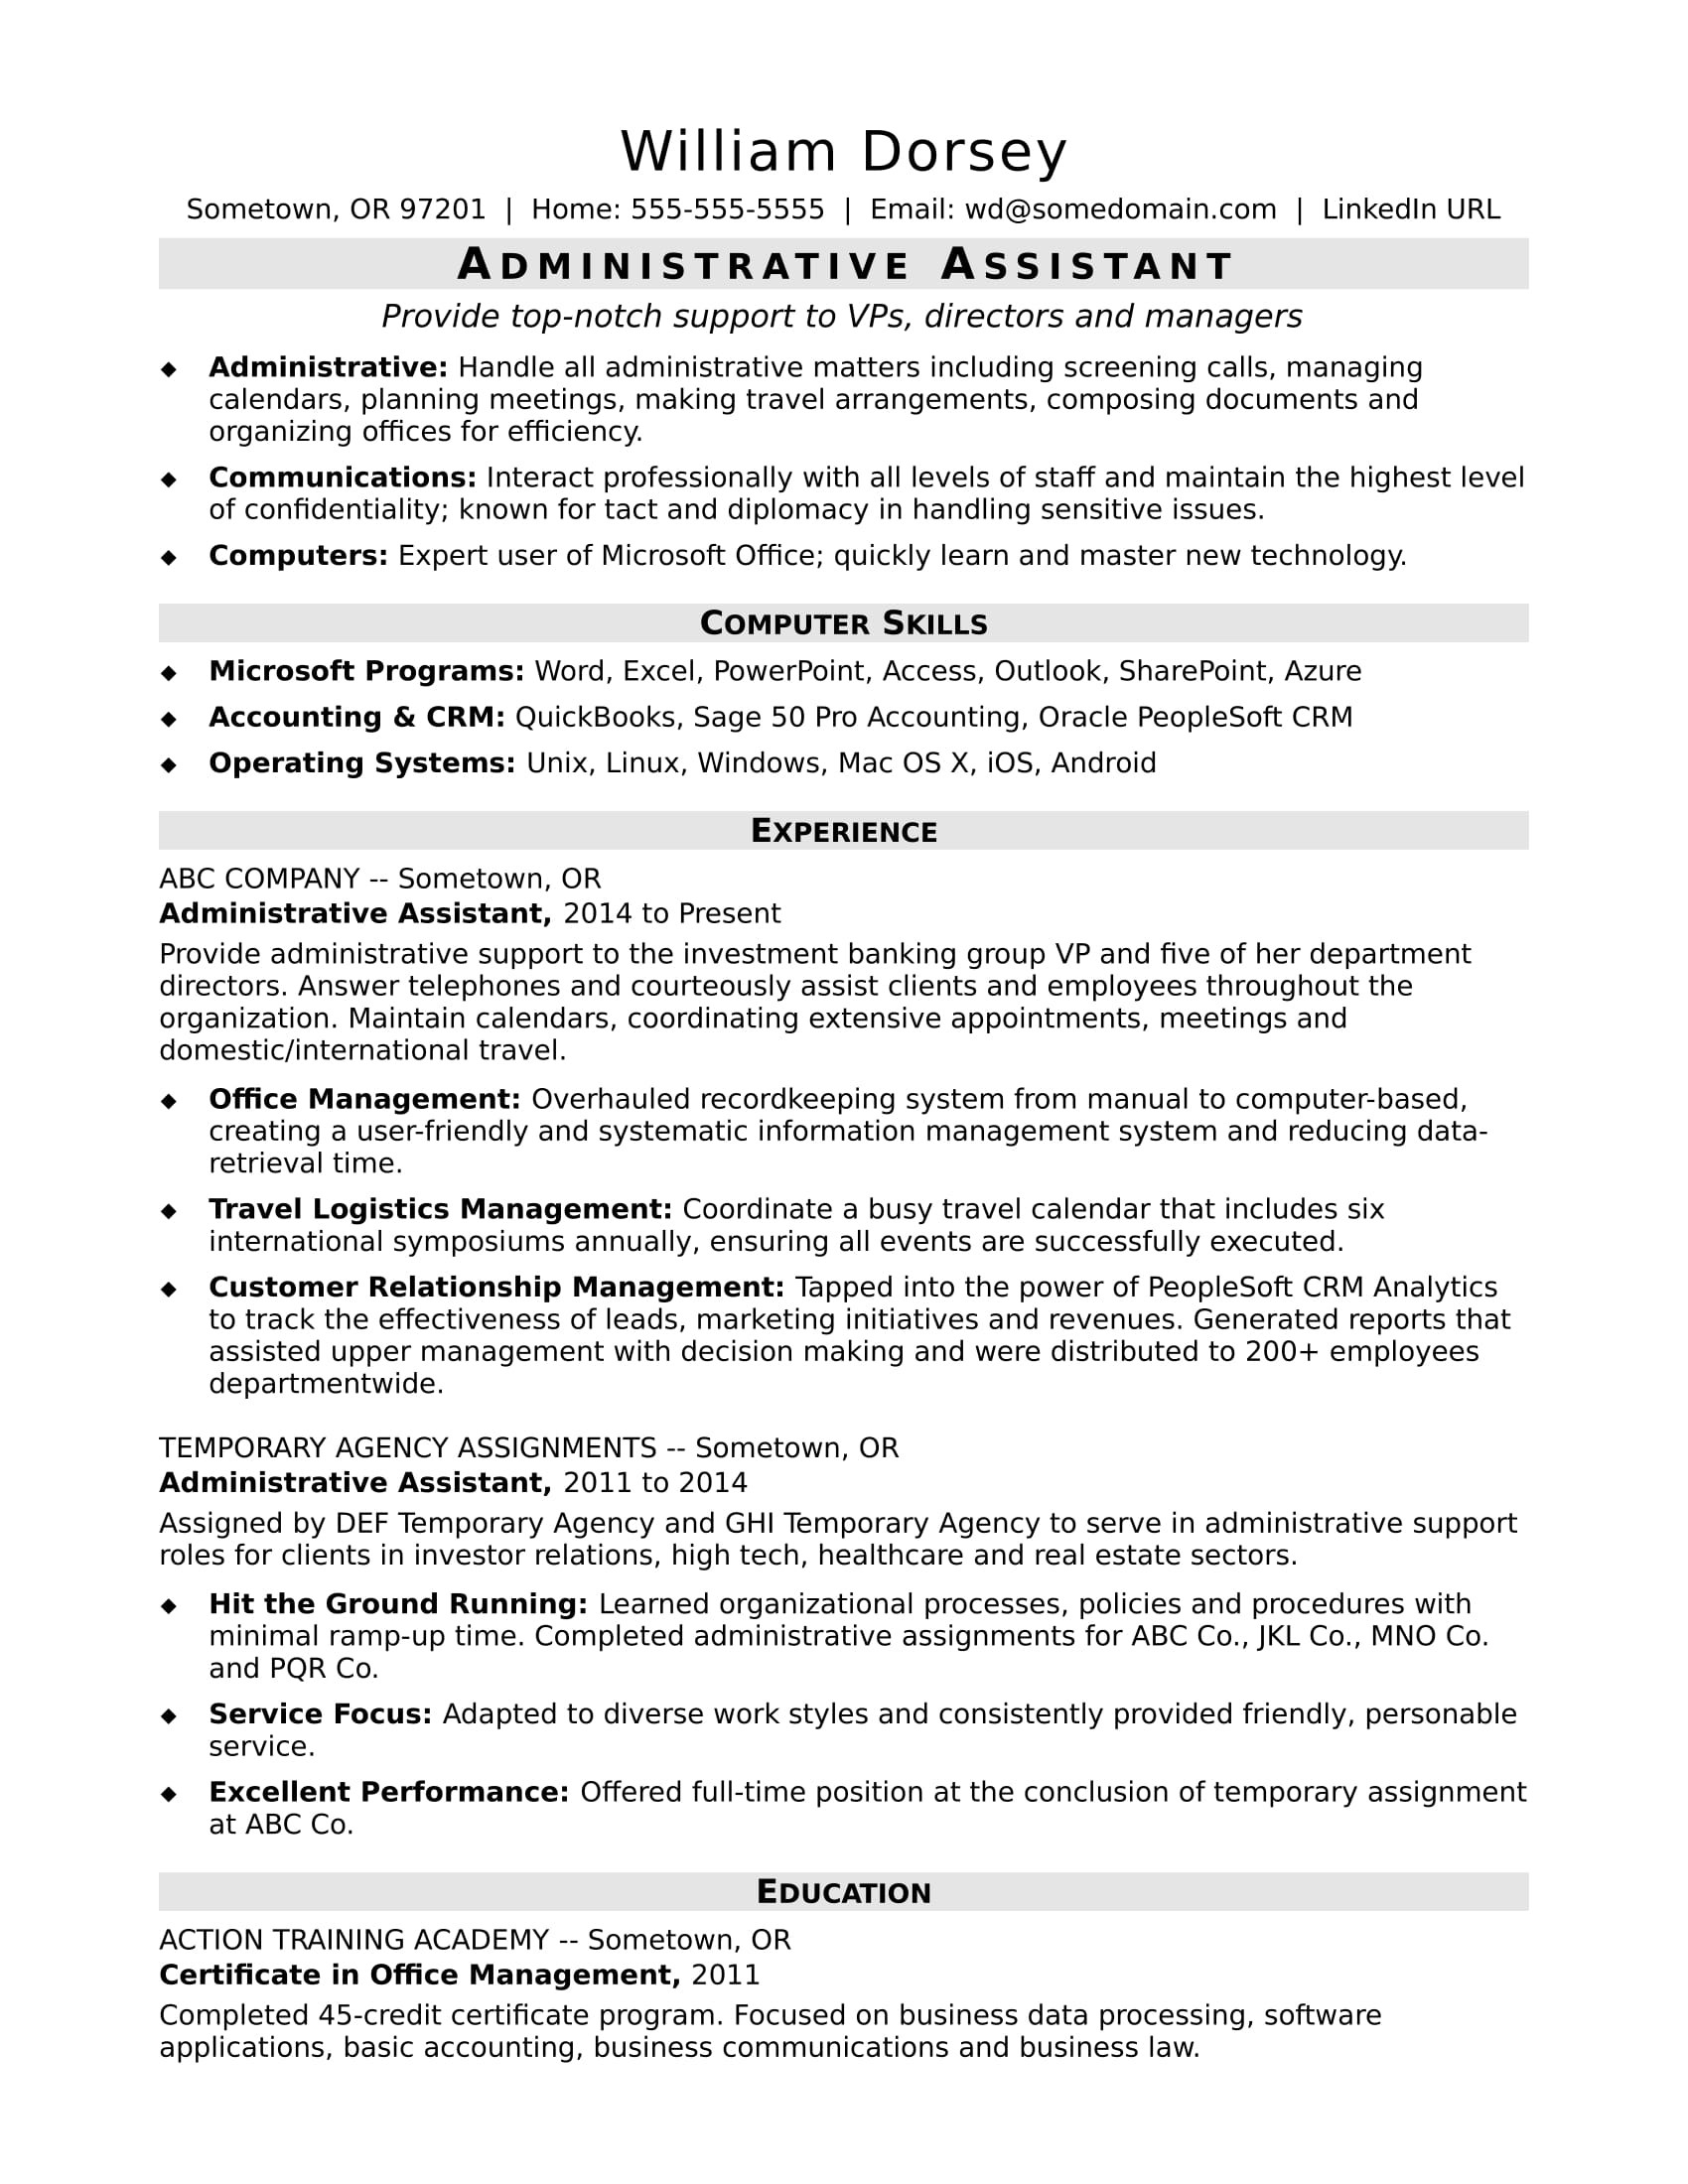 Sample Resumes for Administrative assistant Positions Midlevel Administrative assistant Resume Sample Monster.com